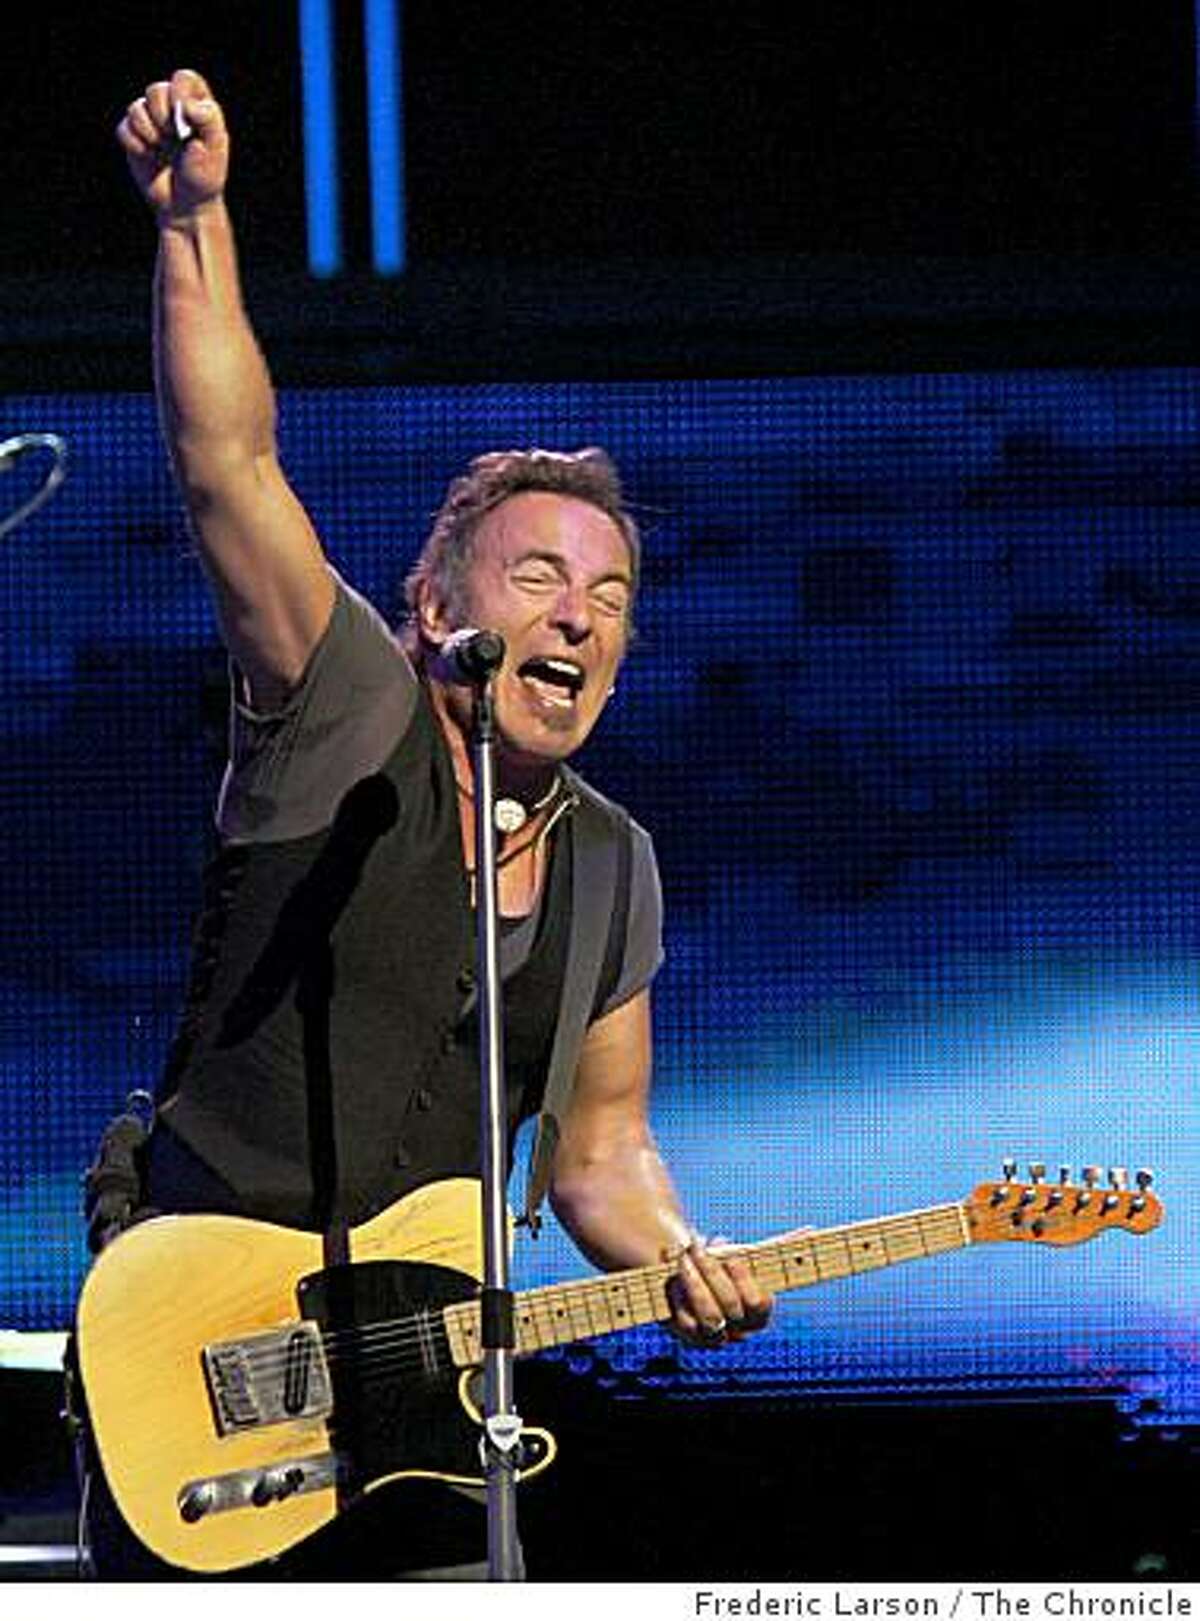 The"Boss" Bruce Springsteen in concert at the HP Pavilion in San Jose on April 1, 2009.